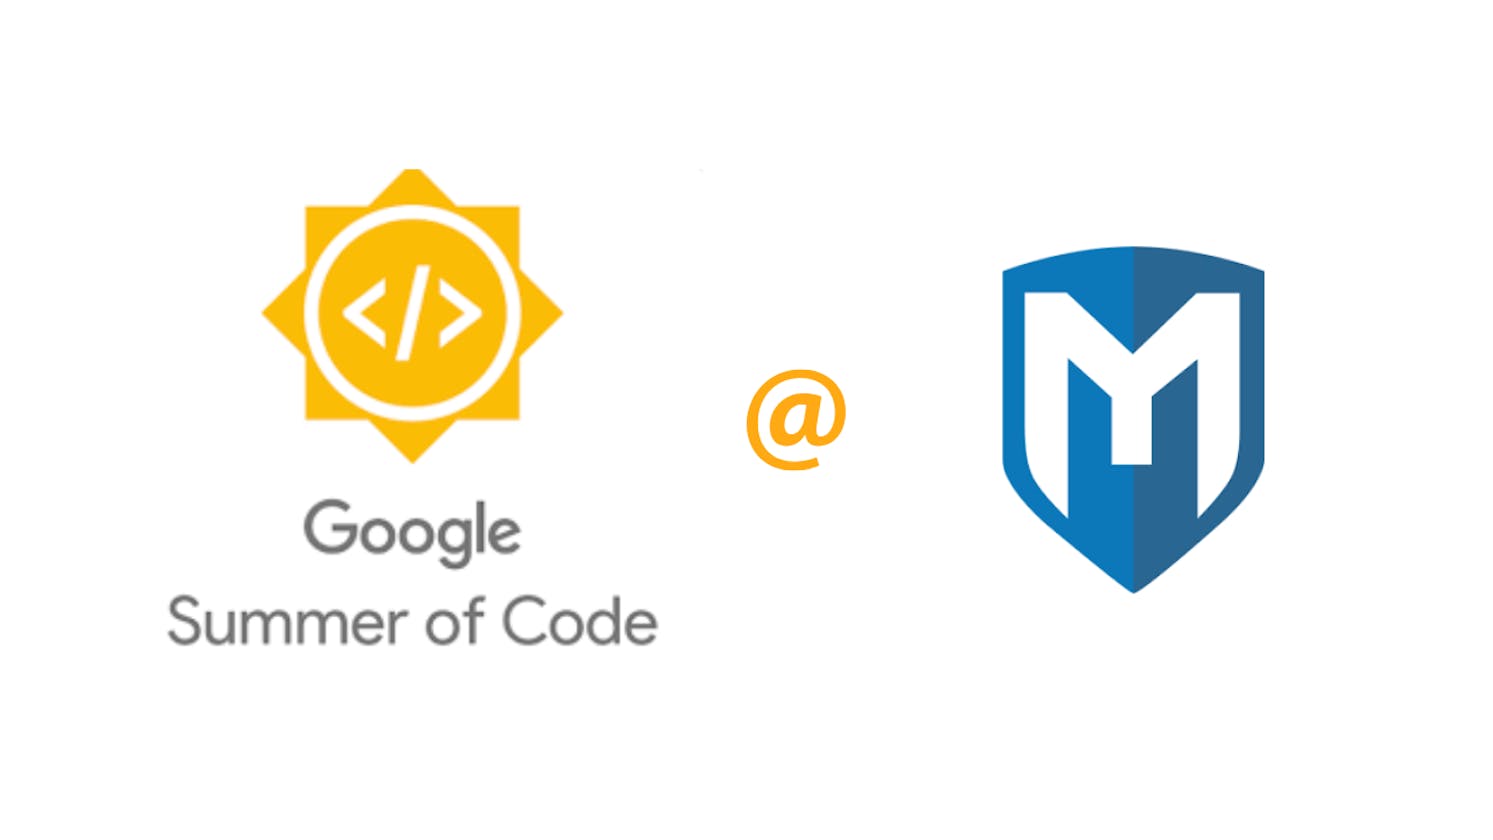 Kicking off Google Summer of Code '23 with The Metasploit Project